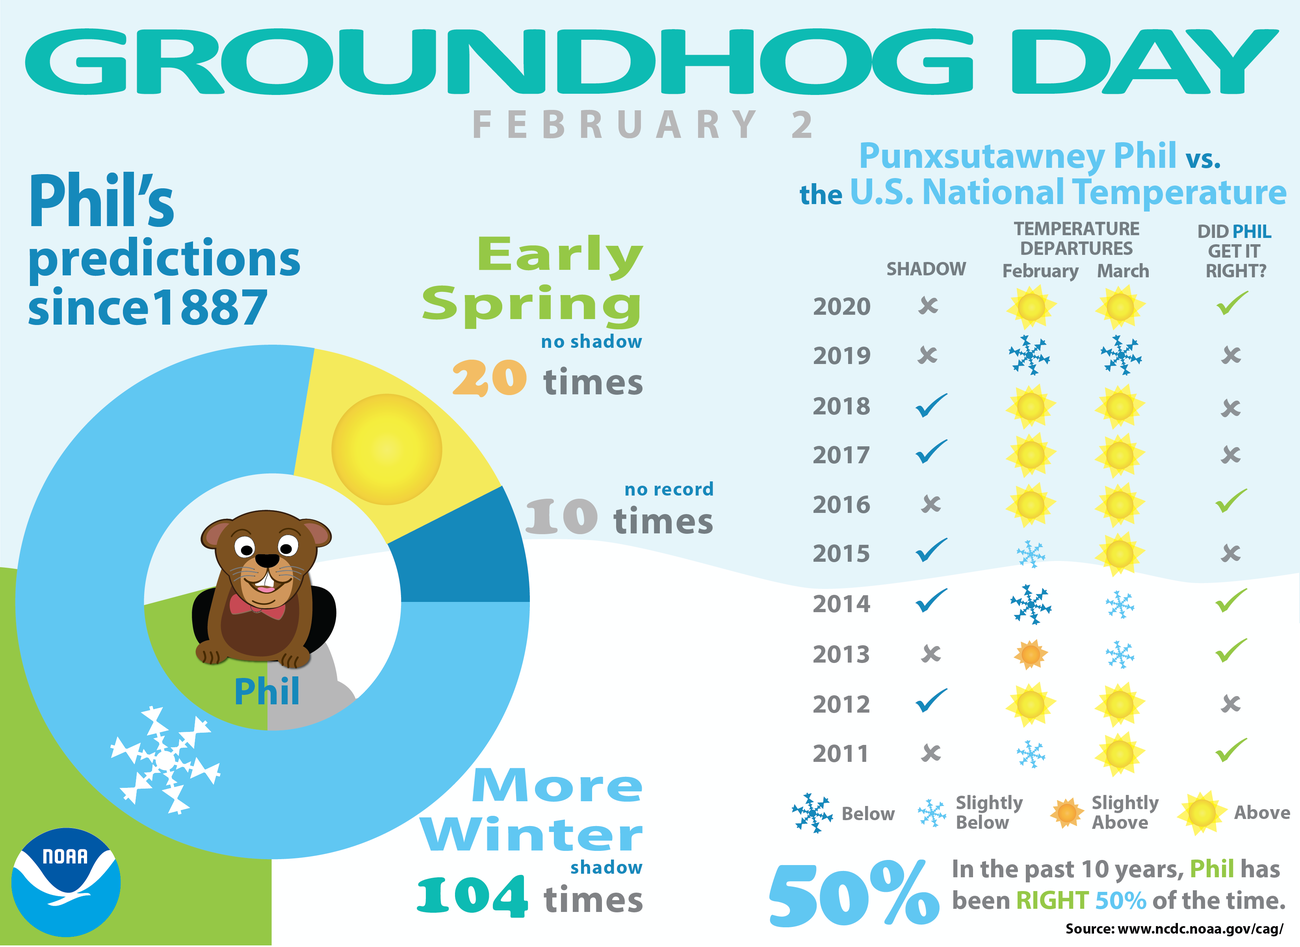 According to the famed groundhog Punxatawney Phil, the U.S. is likely to see 6 more weeks of winter, according to popular folklore. Phil's observers declared that he did, in fact, see his shadow early this morning, February 2, 2021. This infographic shows his history of seasonal "predictions" (seeing his shadow or not) from 2011 through 2020. As for this year, we'll have to wait and see if Phil's predictions come true!